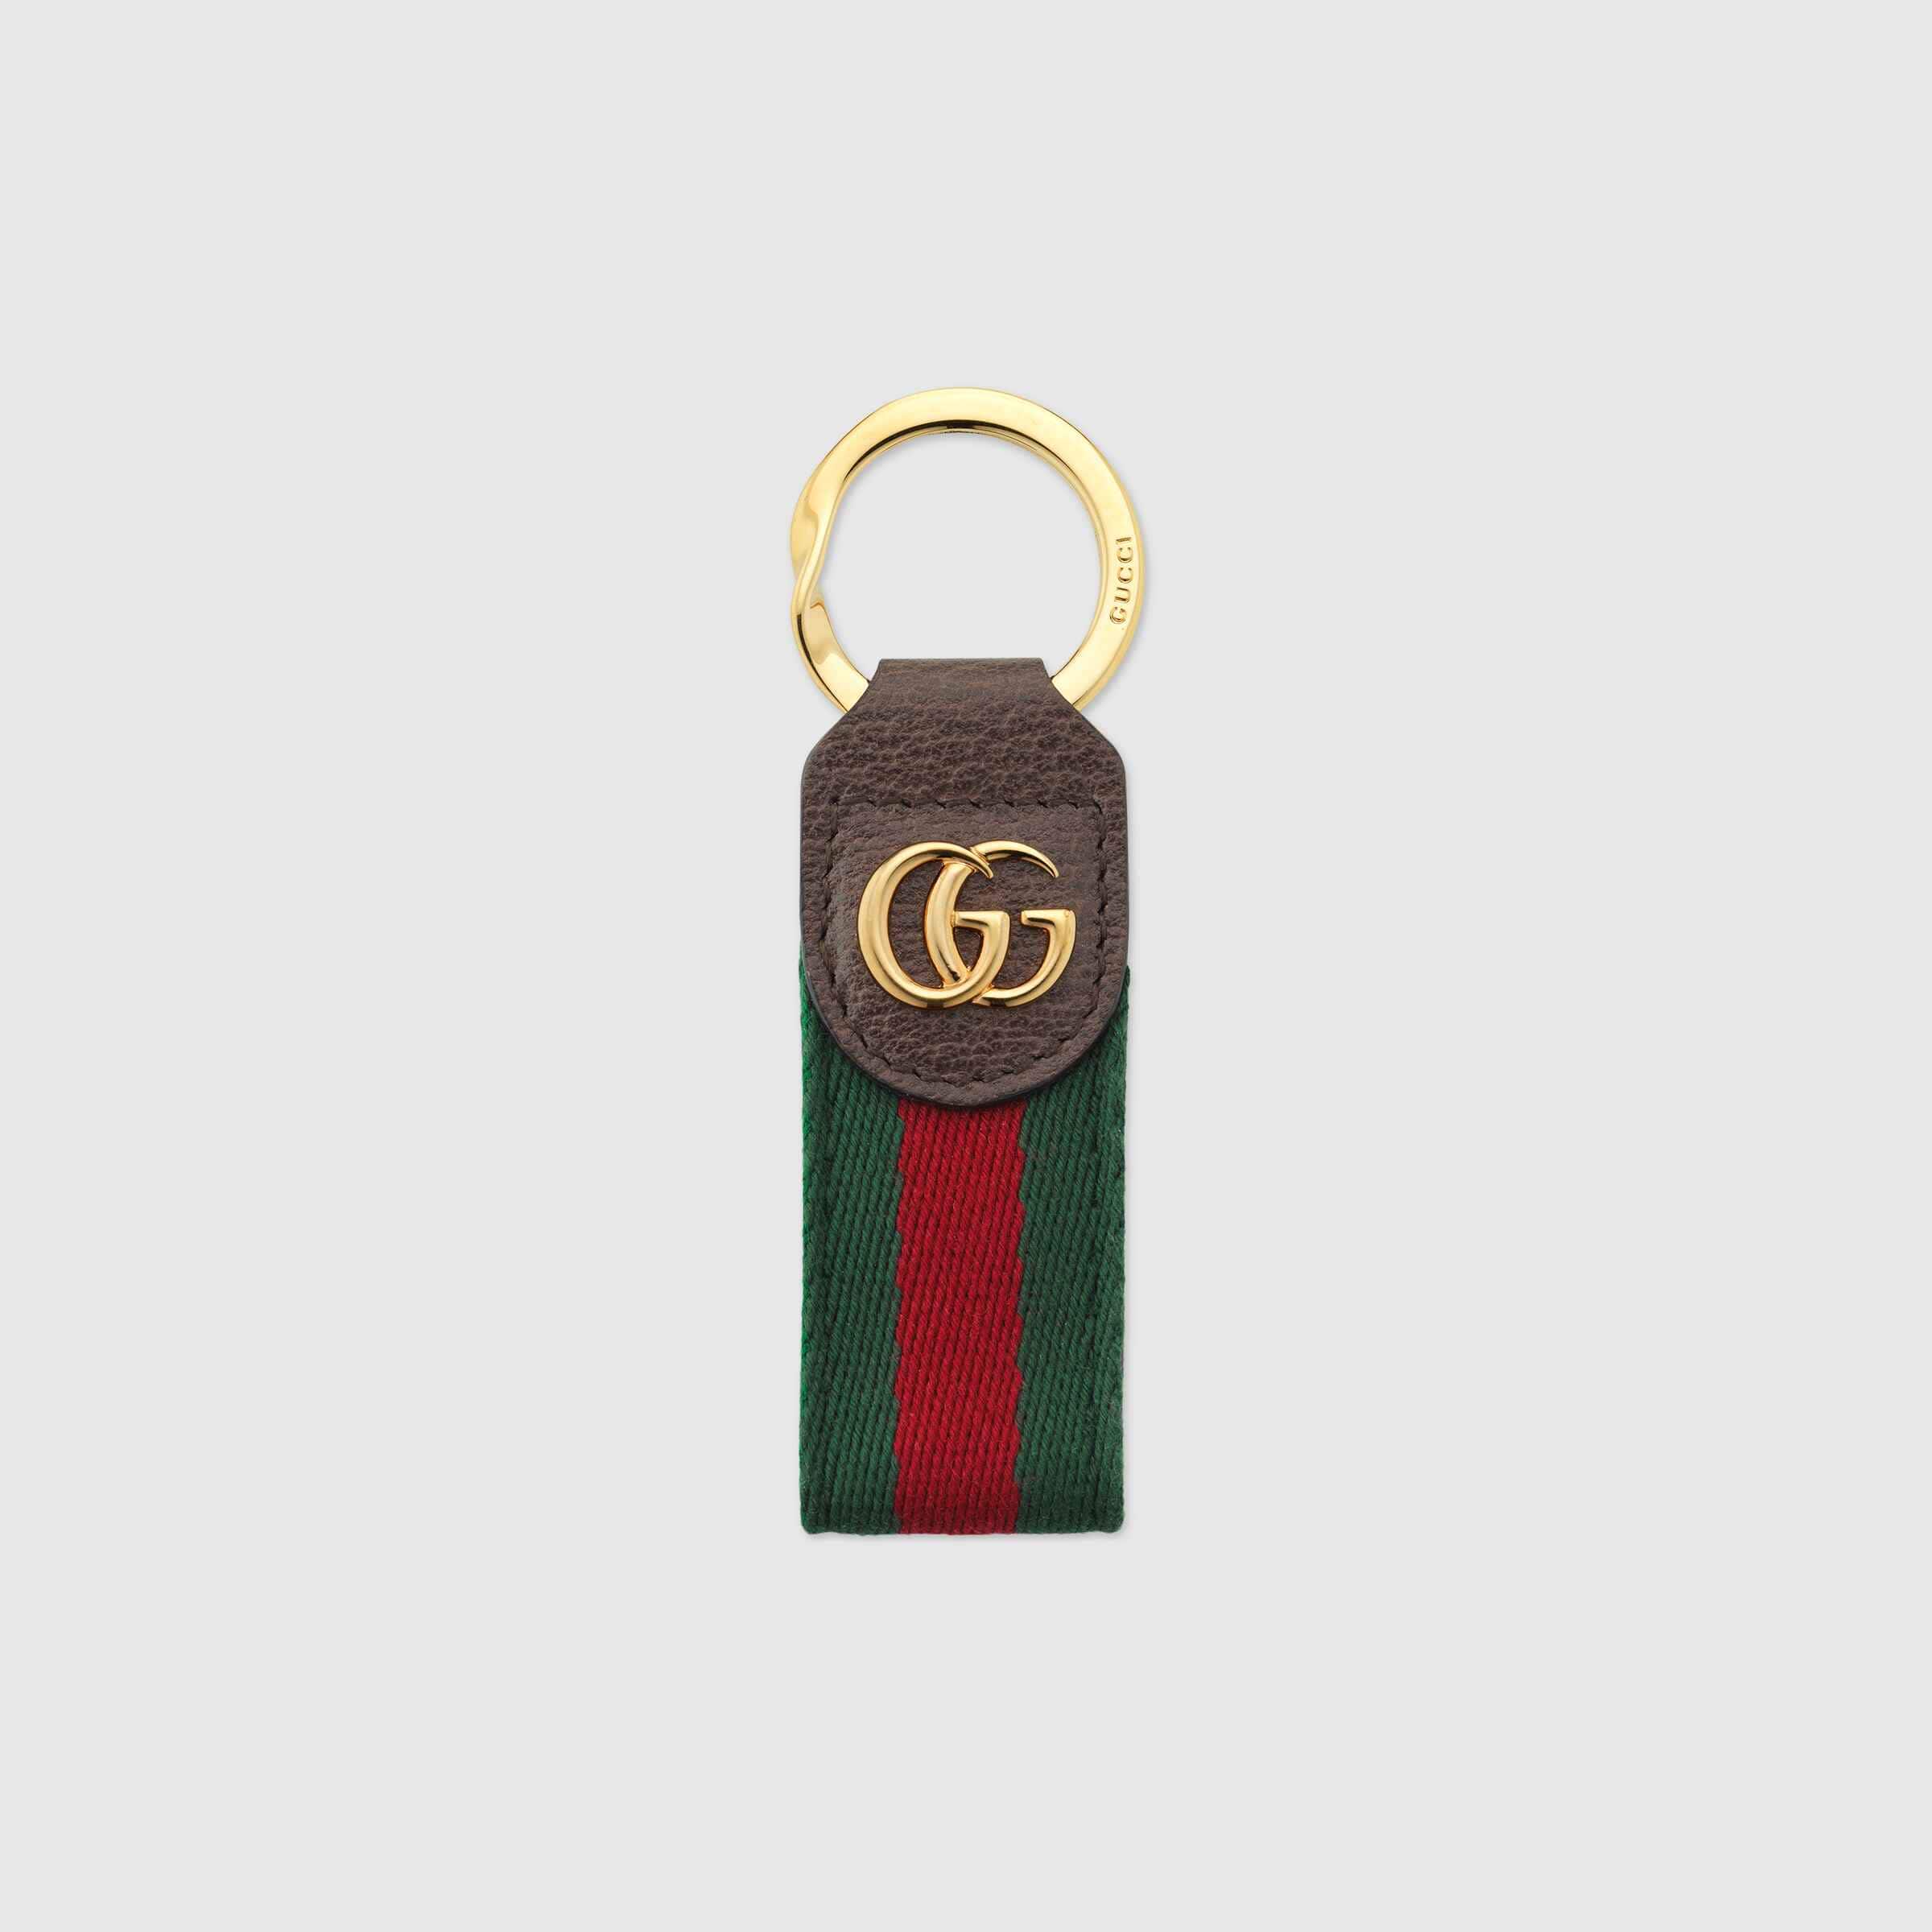 I BOUGHT THE CHEAPEST ITEMS FROM GUCCI, TIFFANY